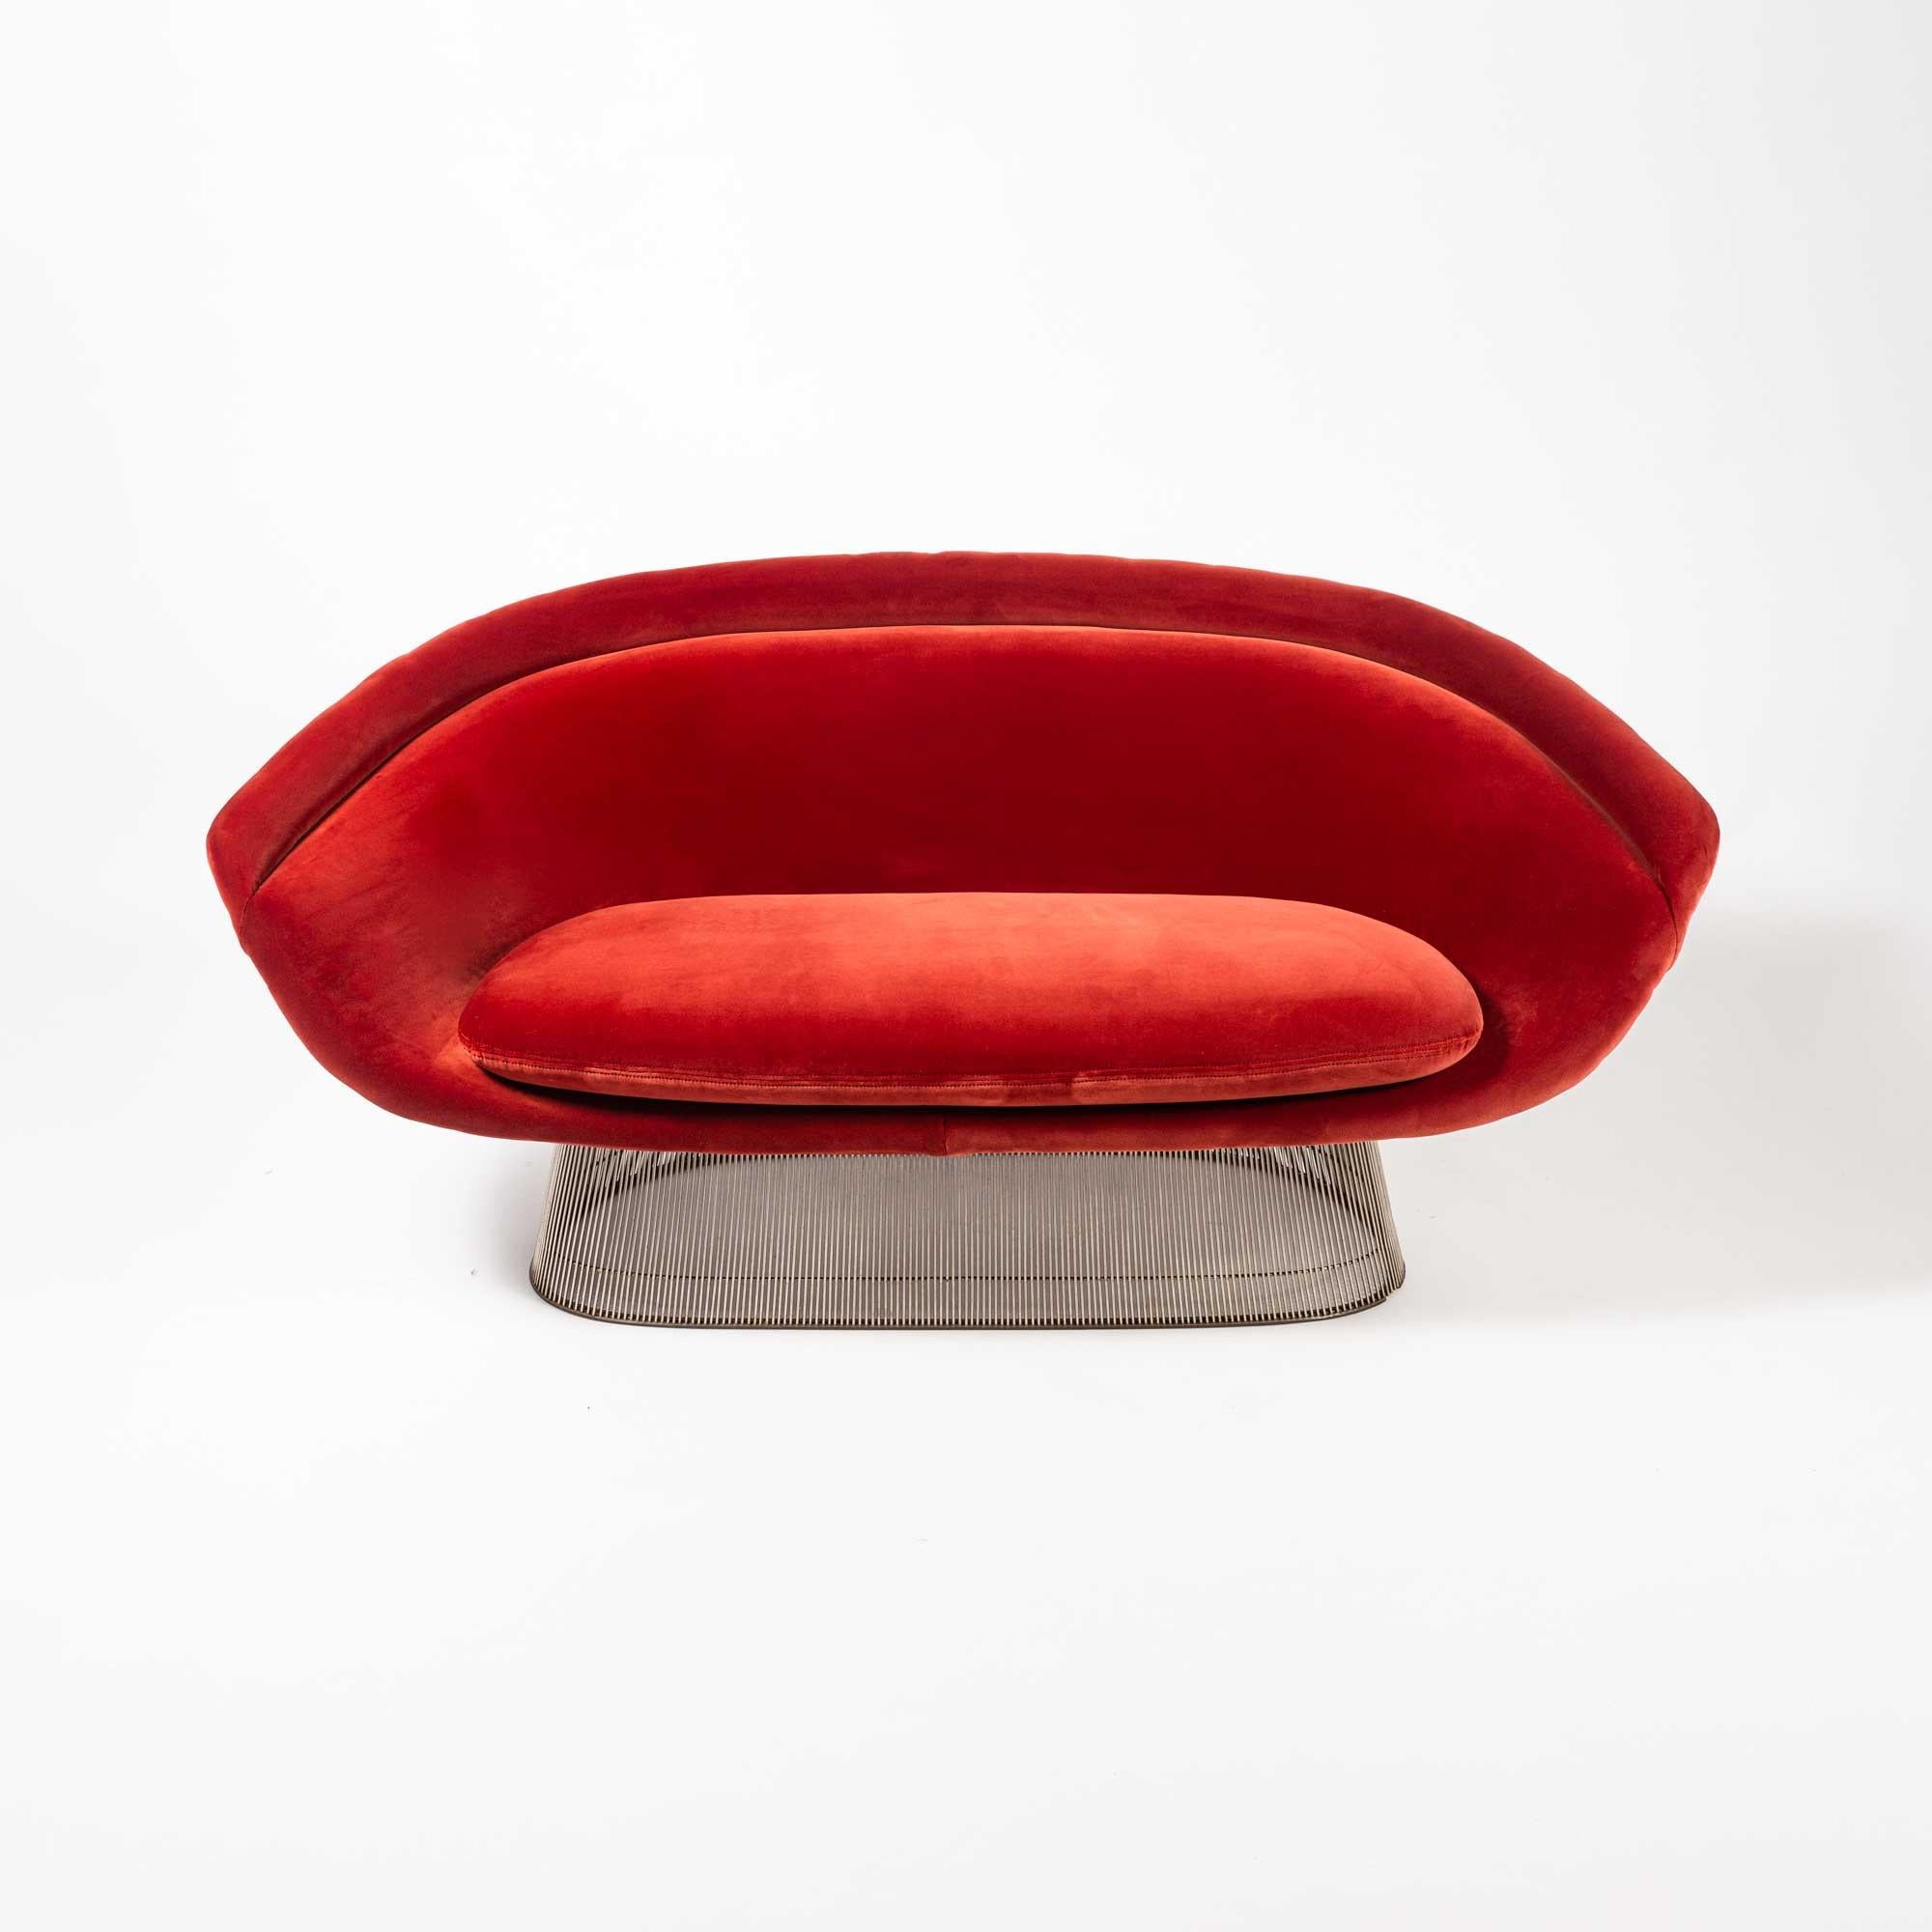 This extremely rare Warren Platner settee was originally introduced by Knoll in 1966, as an icon of modern design furniture and was part of the original Platner furniture series. Due to the labor-intensive production and resulting high price, this